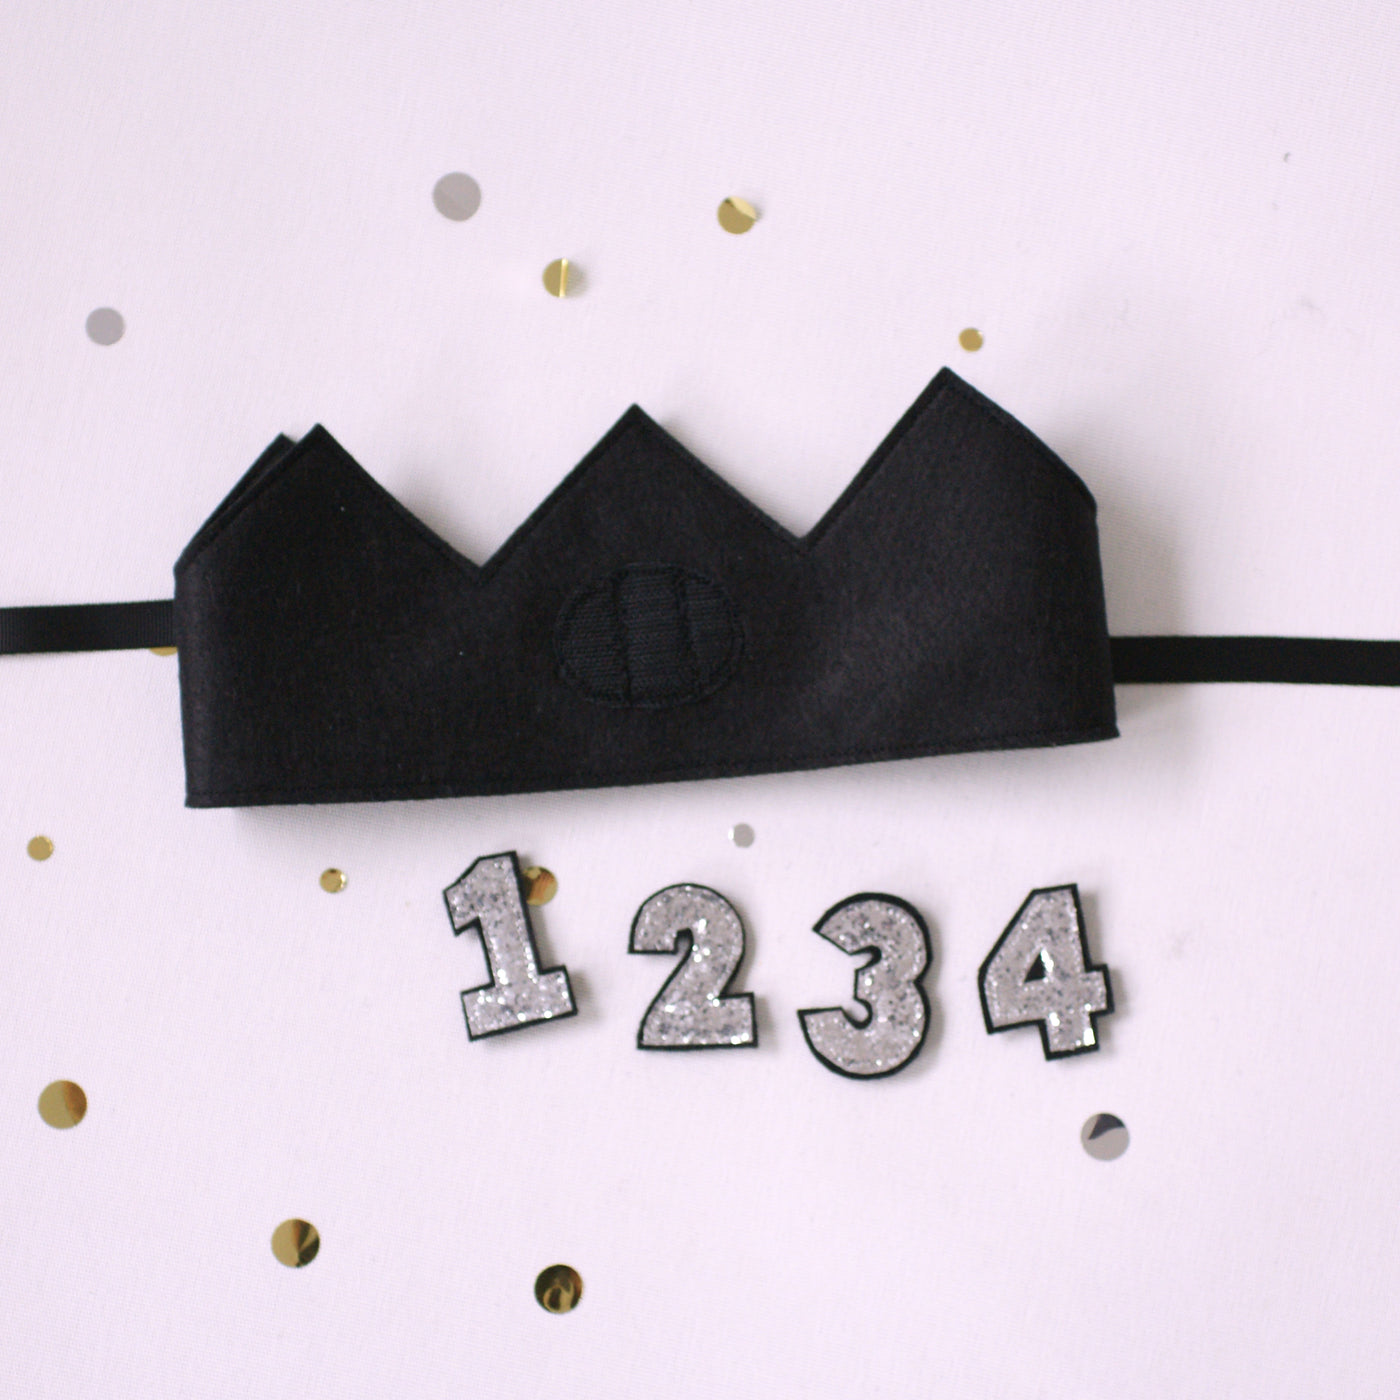 removeable number birthday crown with interchangeable numbers to reuse each birthday